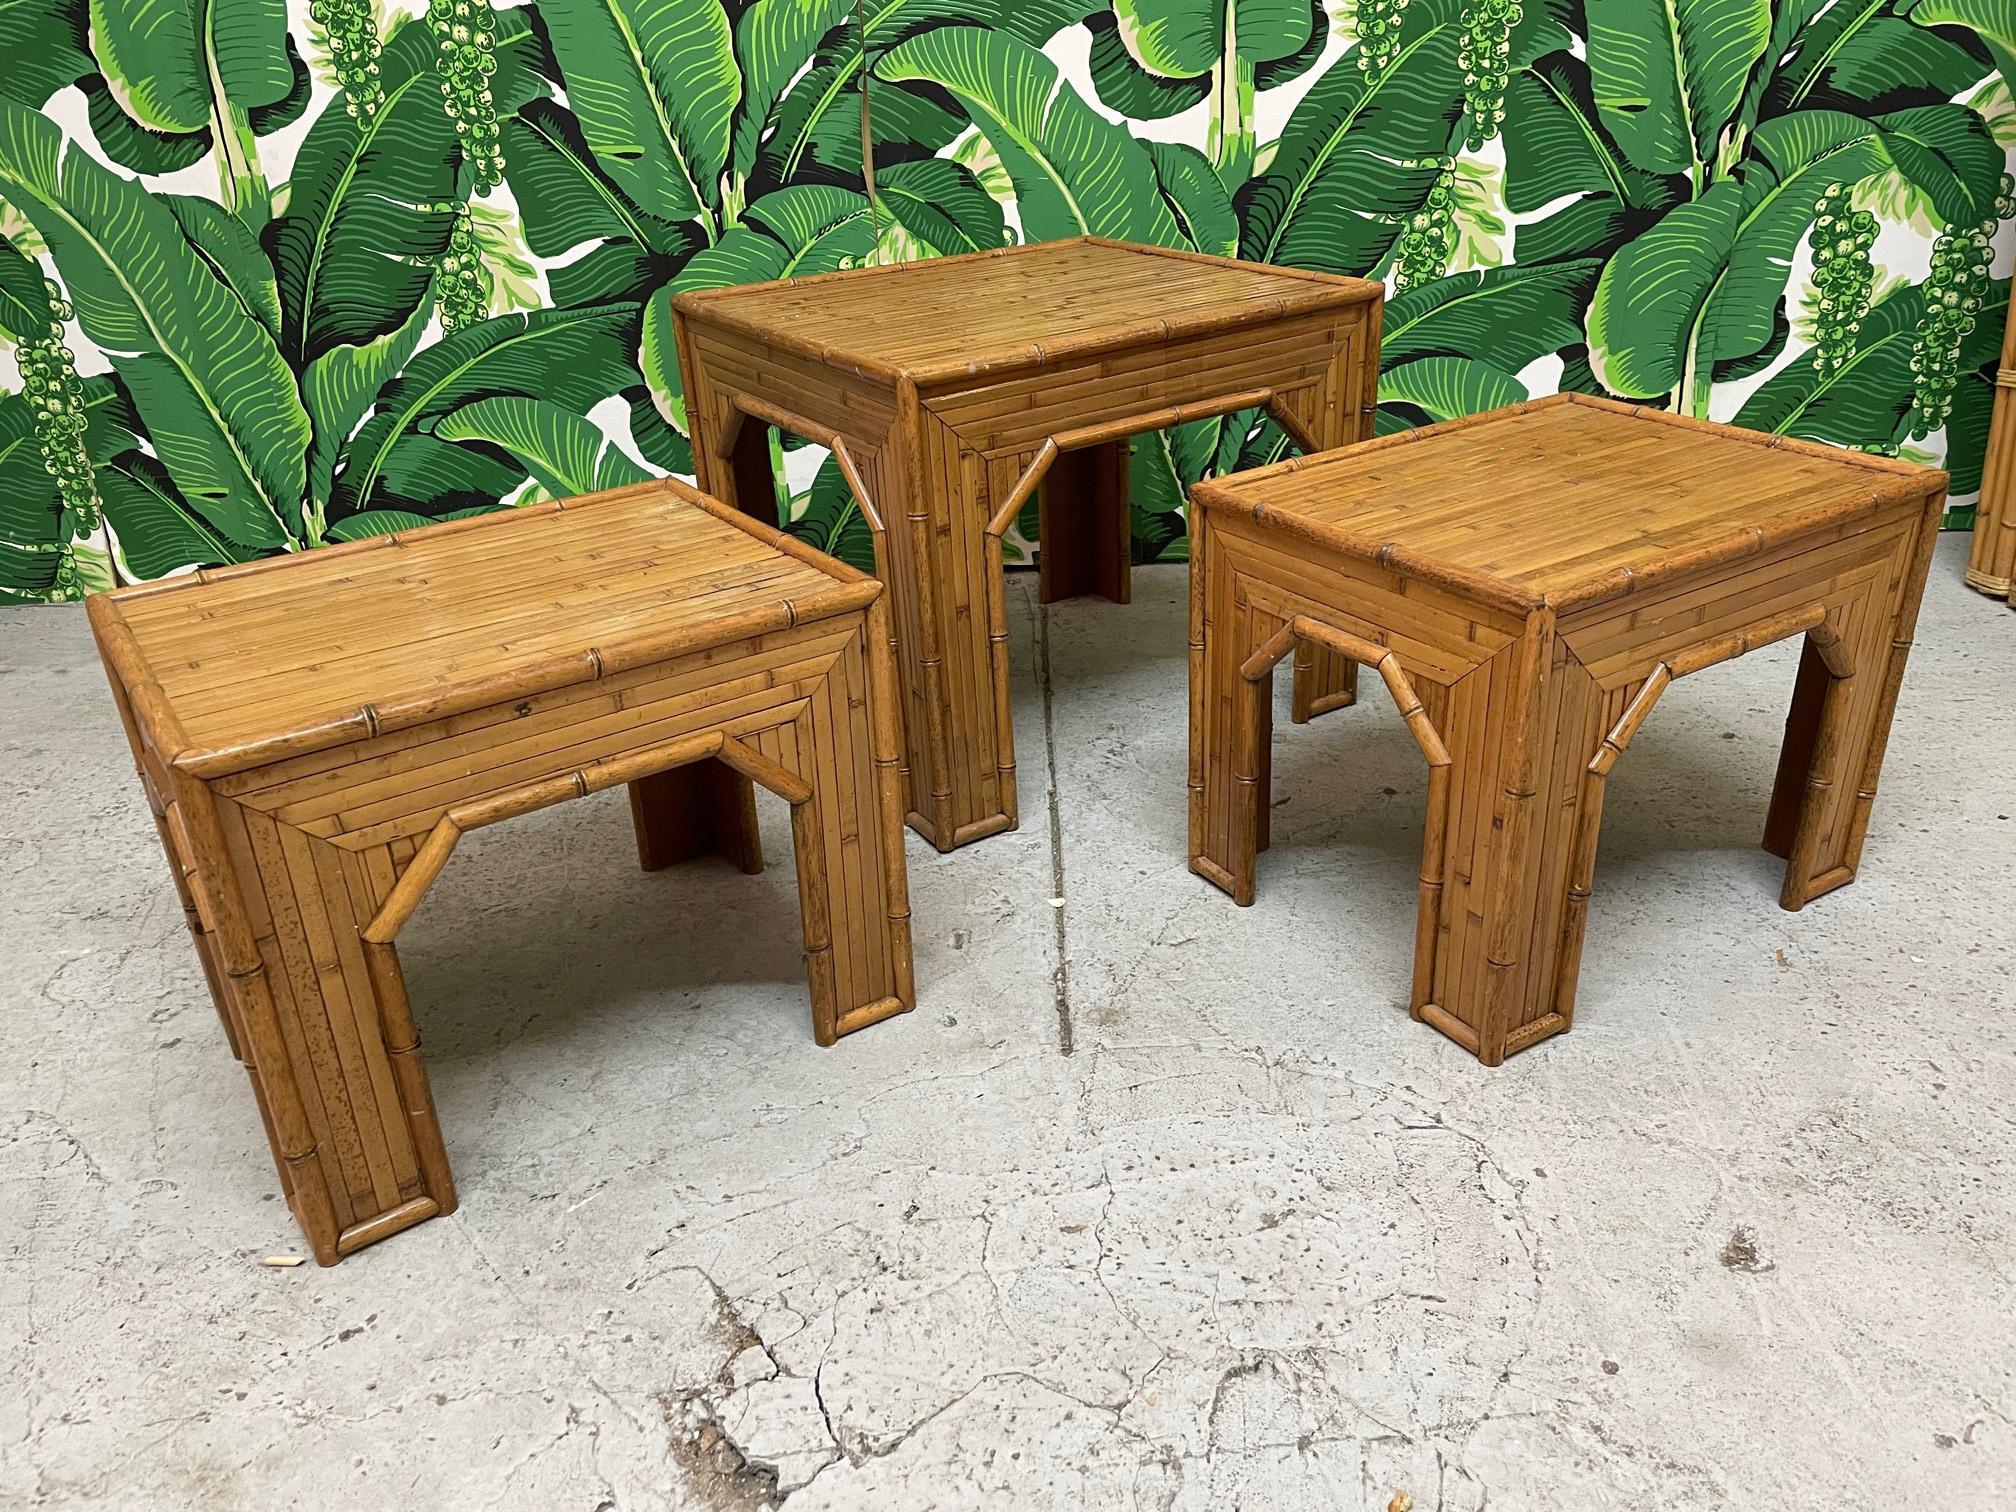 Set of 3 vintage side tables feature full veneer of split reed rattan and faux bamboo detailing. Two smaller matching tables measure 20